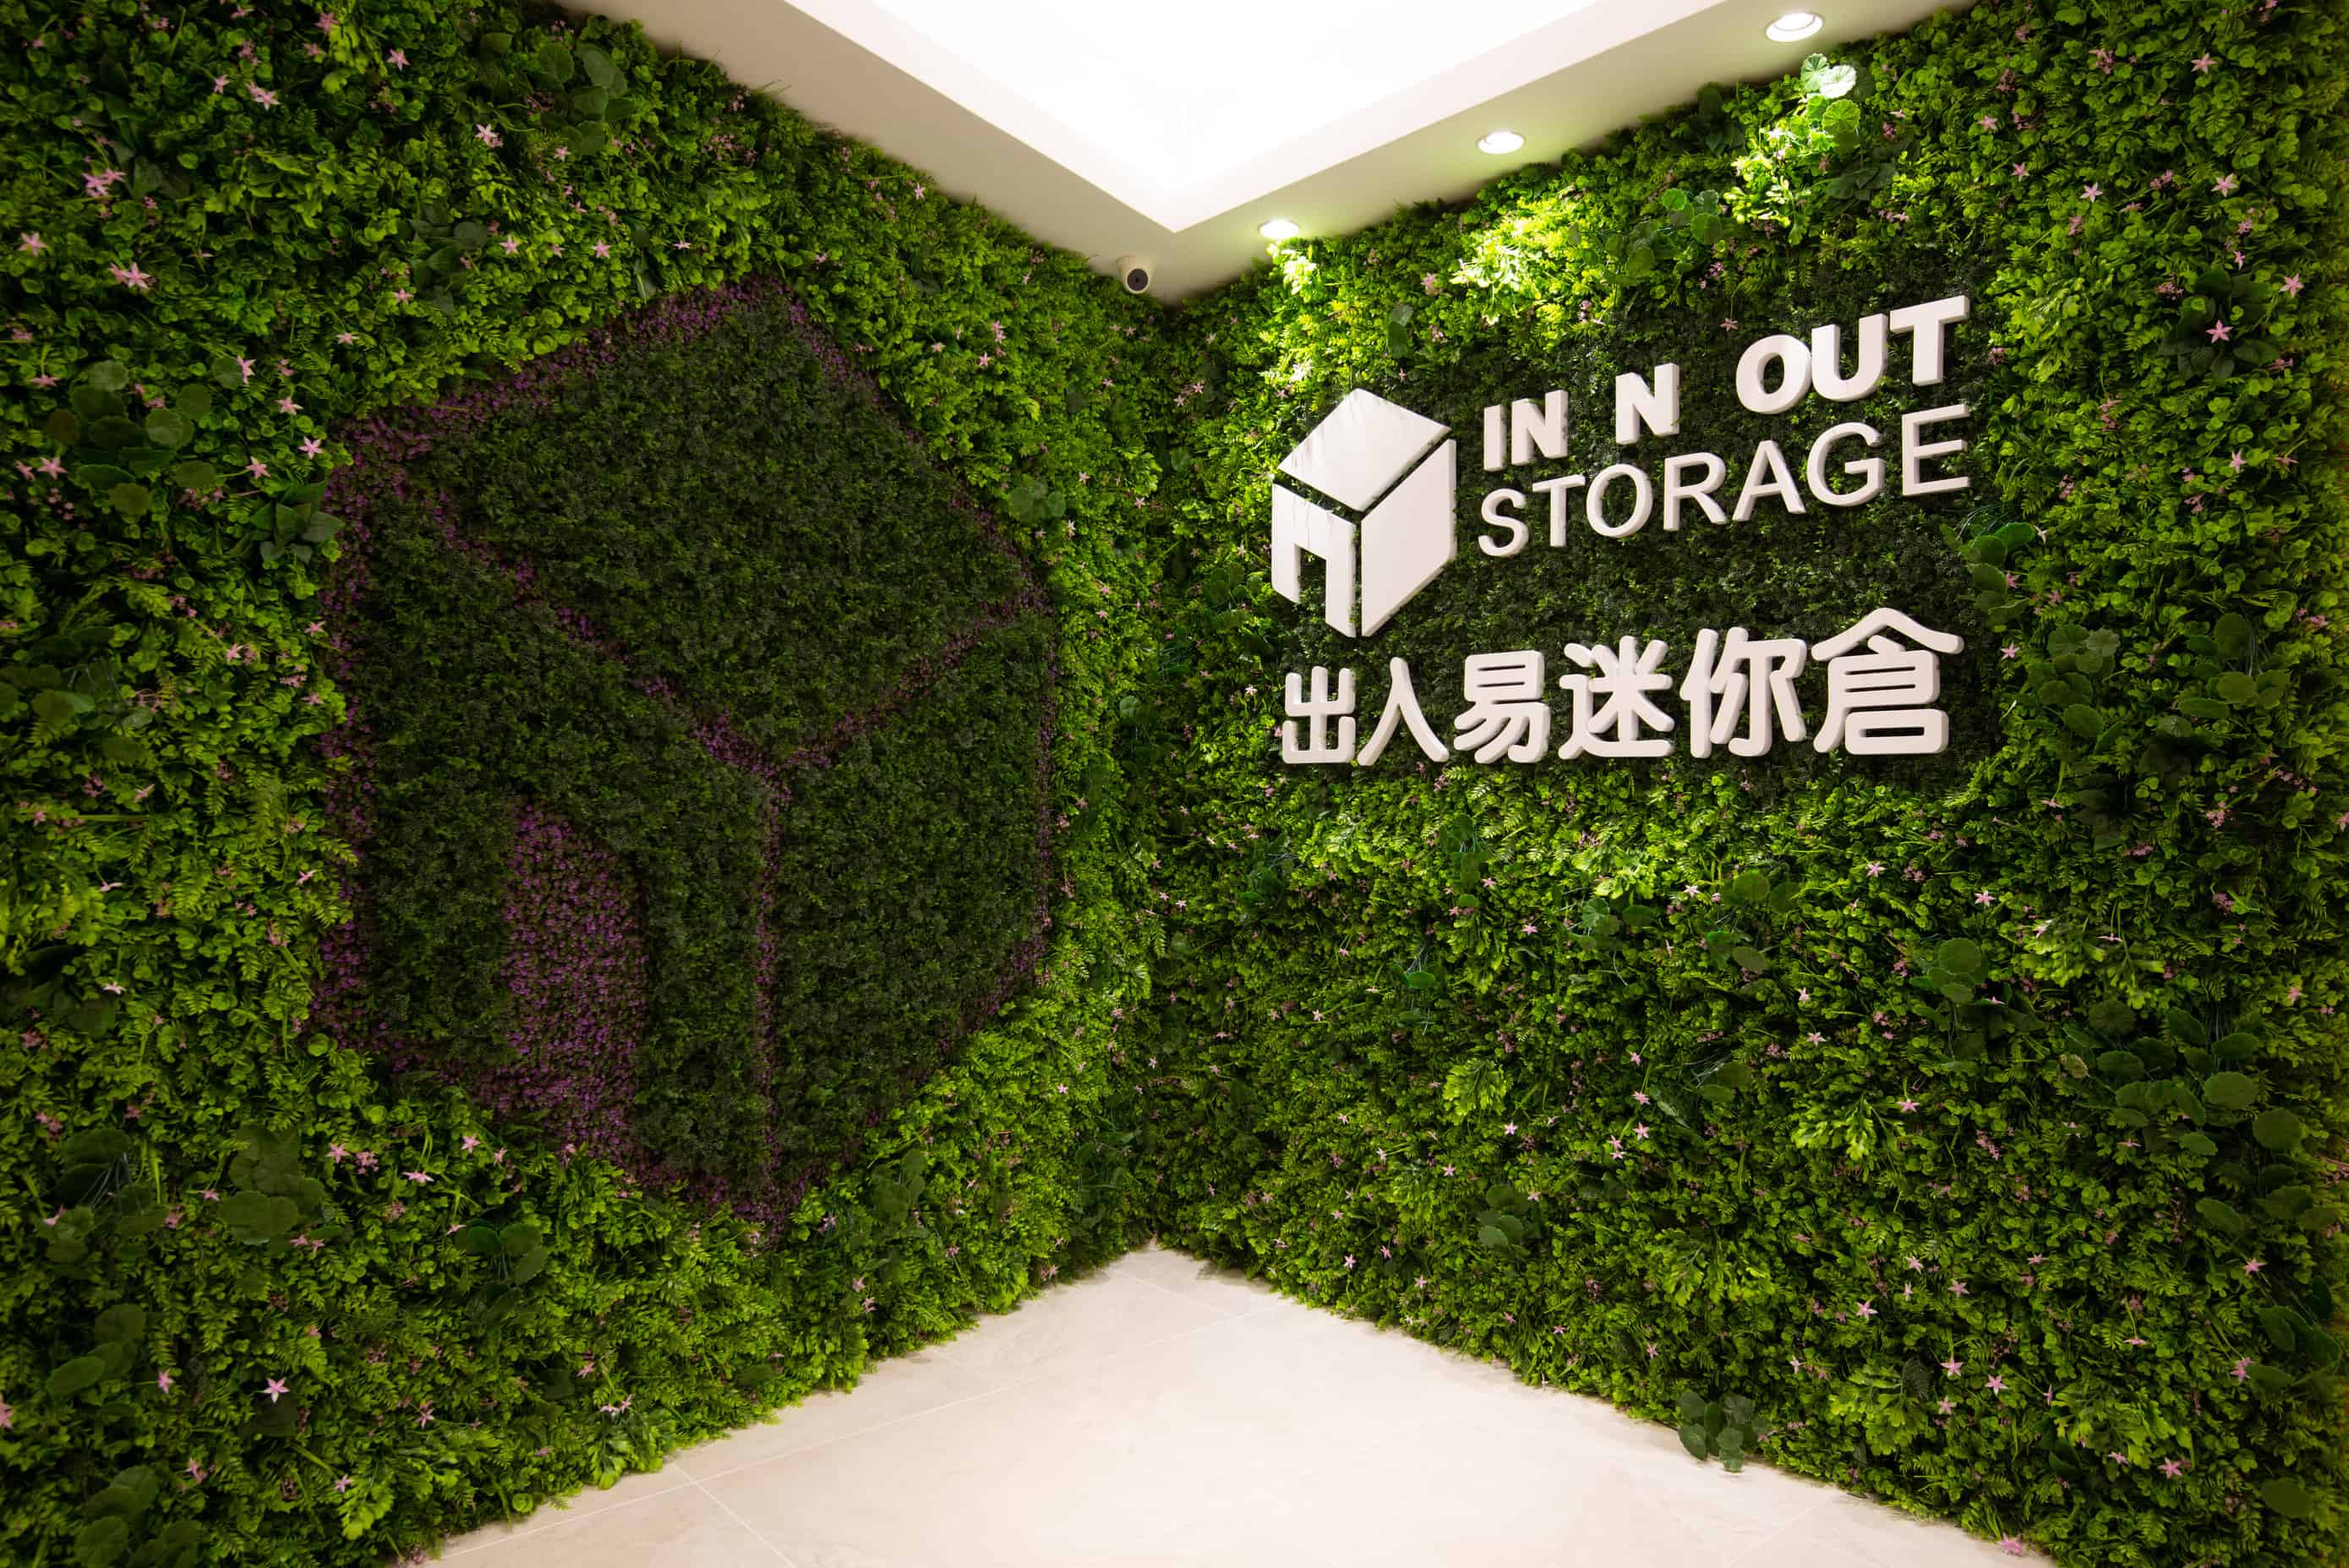 Yau Tong - IN N OUT STORAGE